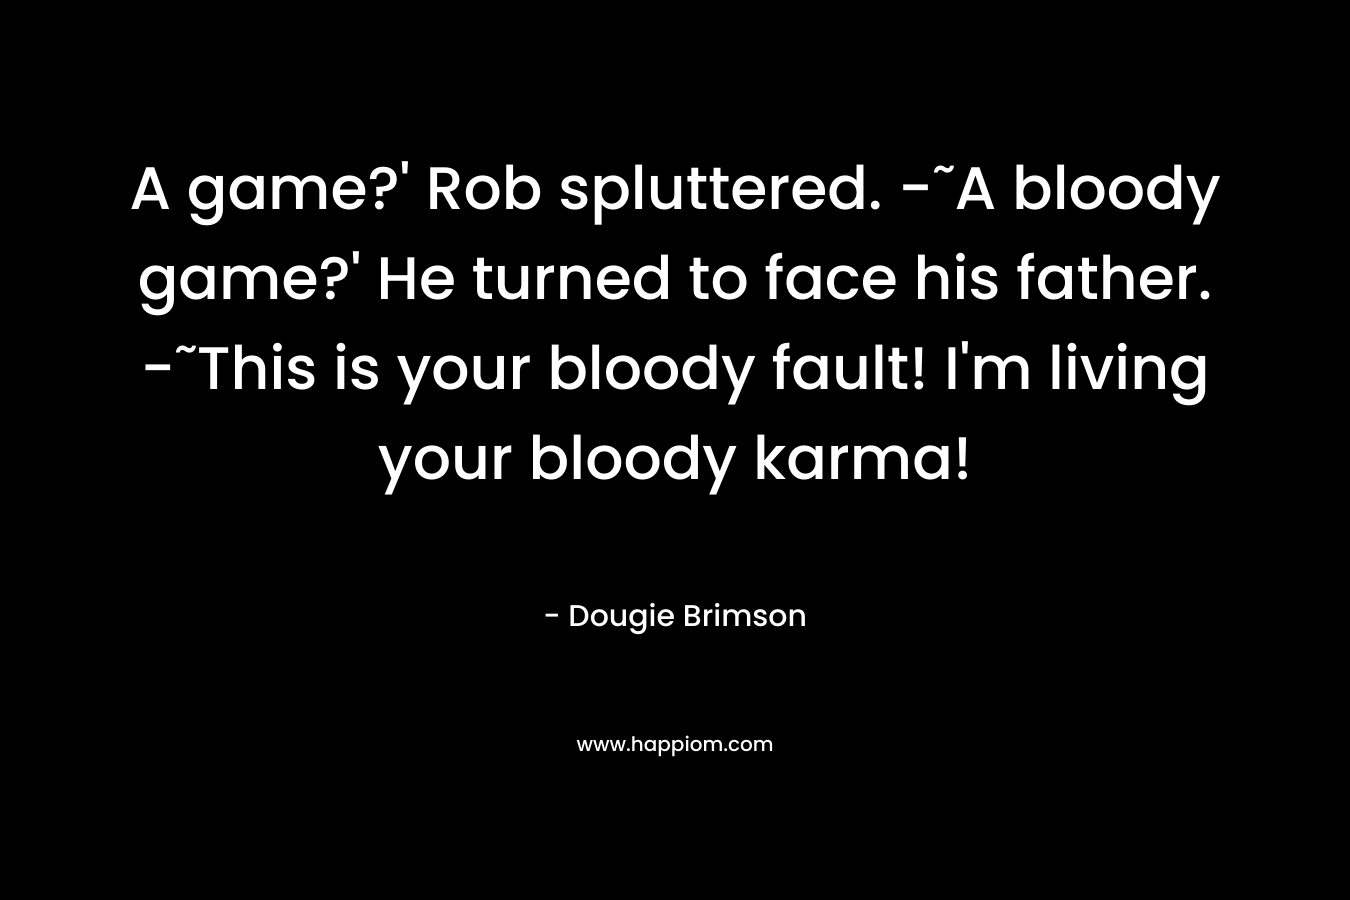 A game?' Rob spluttered. -˜A bloody game?' He turned to face his father. -˜This is your bloody fault! I'm living your bloody karma!